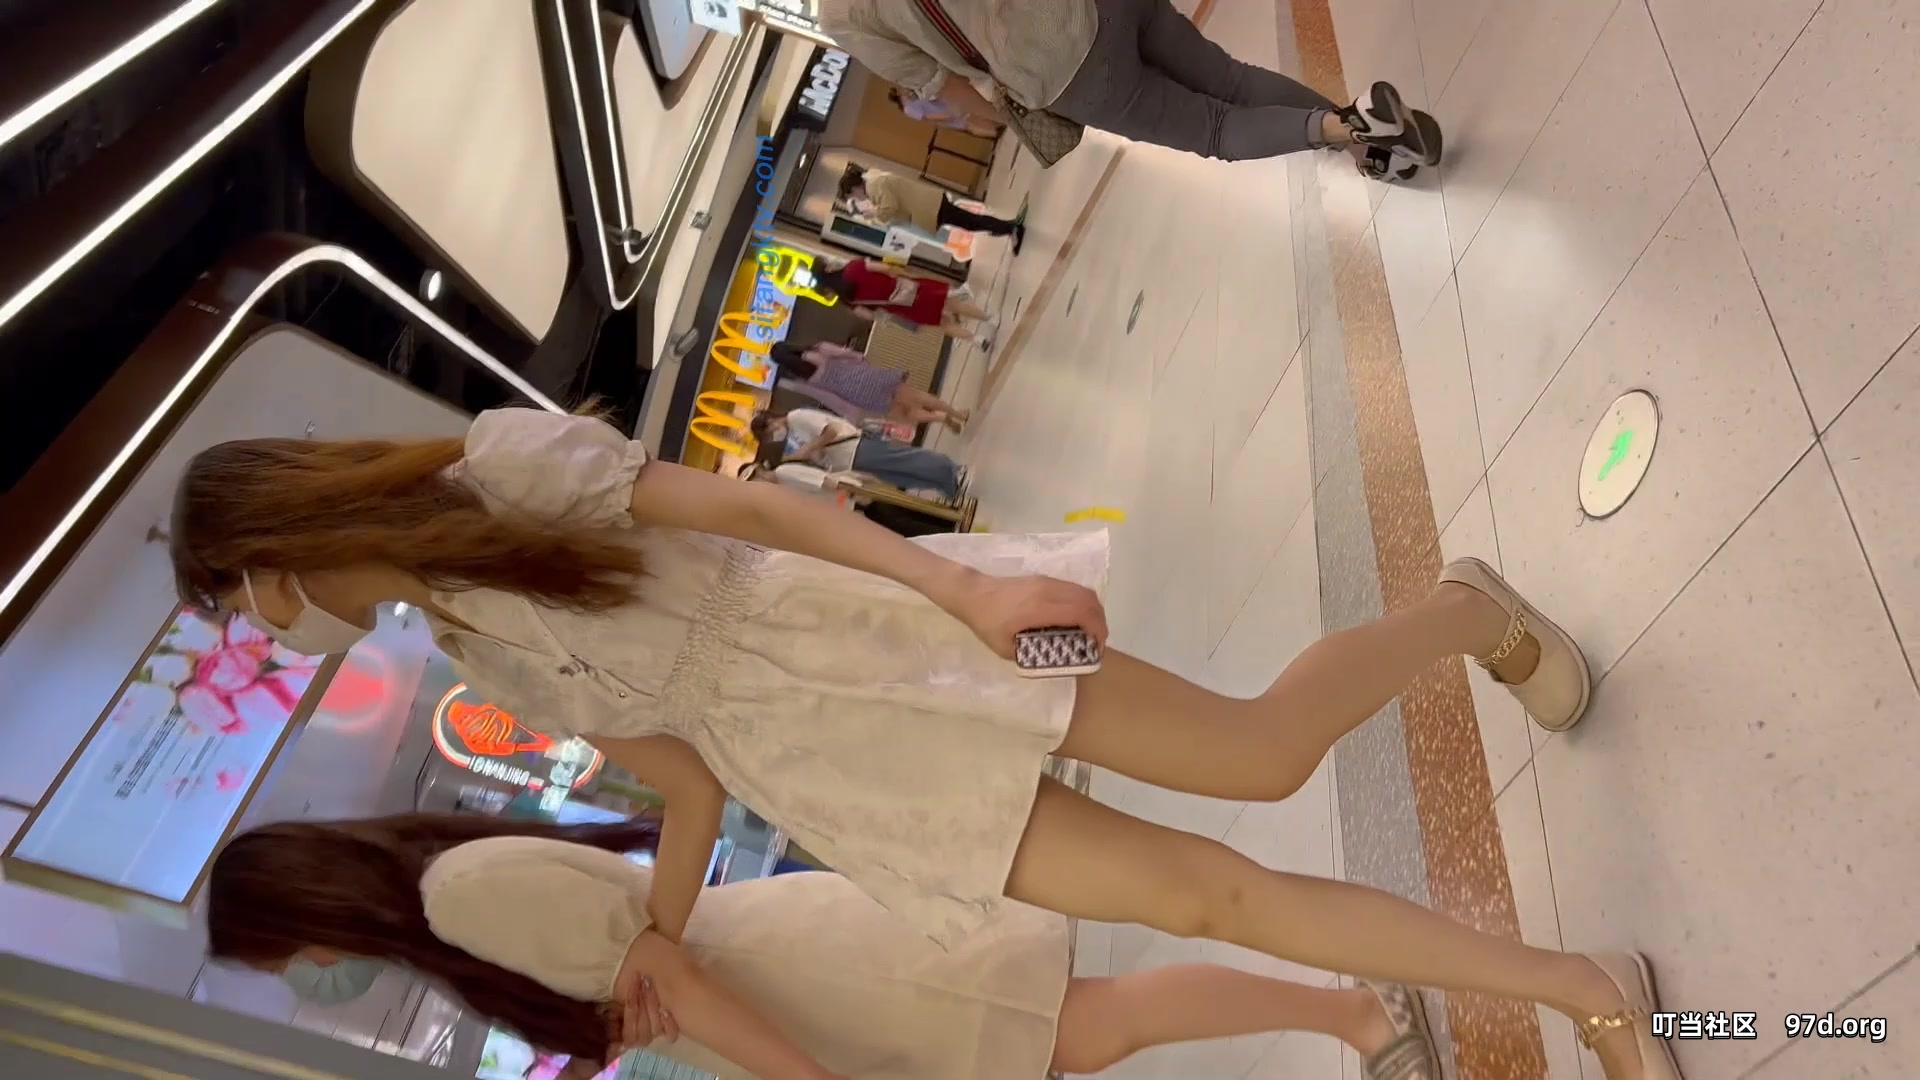 The mall is chasing a schoolgirl with legs as thin as her arms, and her deep, long ass cleavage is pushing the translucent lingerie out of the way.